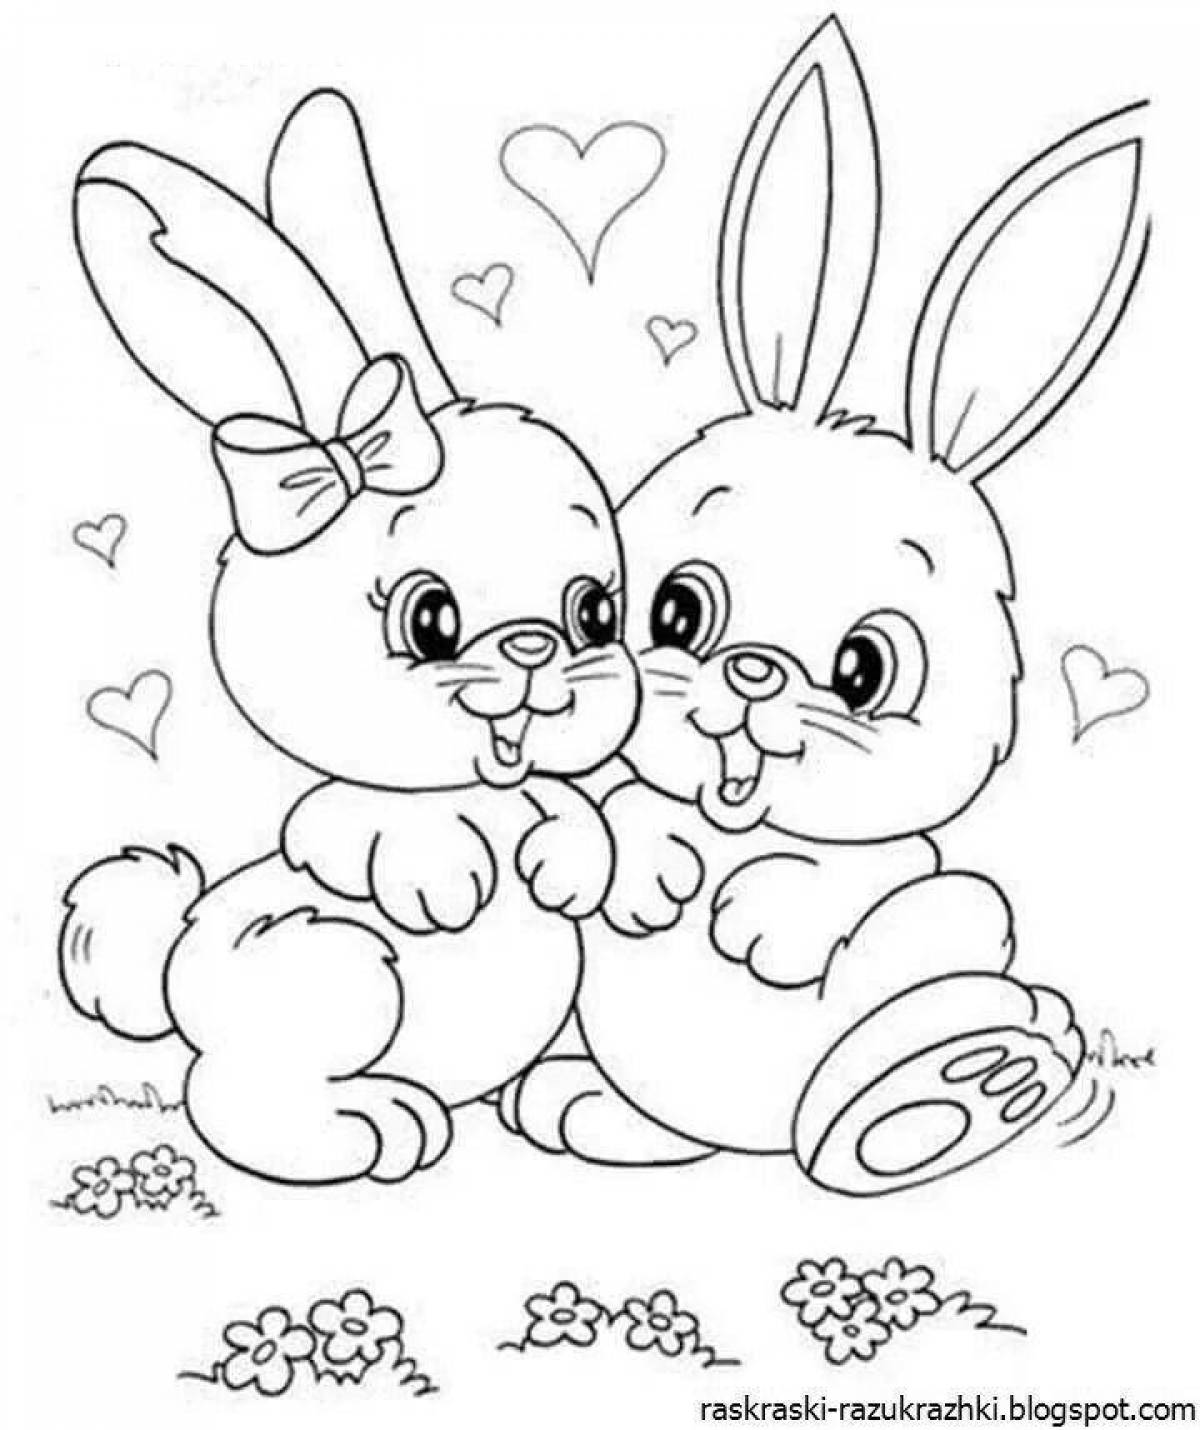 Snuggly coloring page bunny for kids